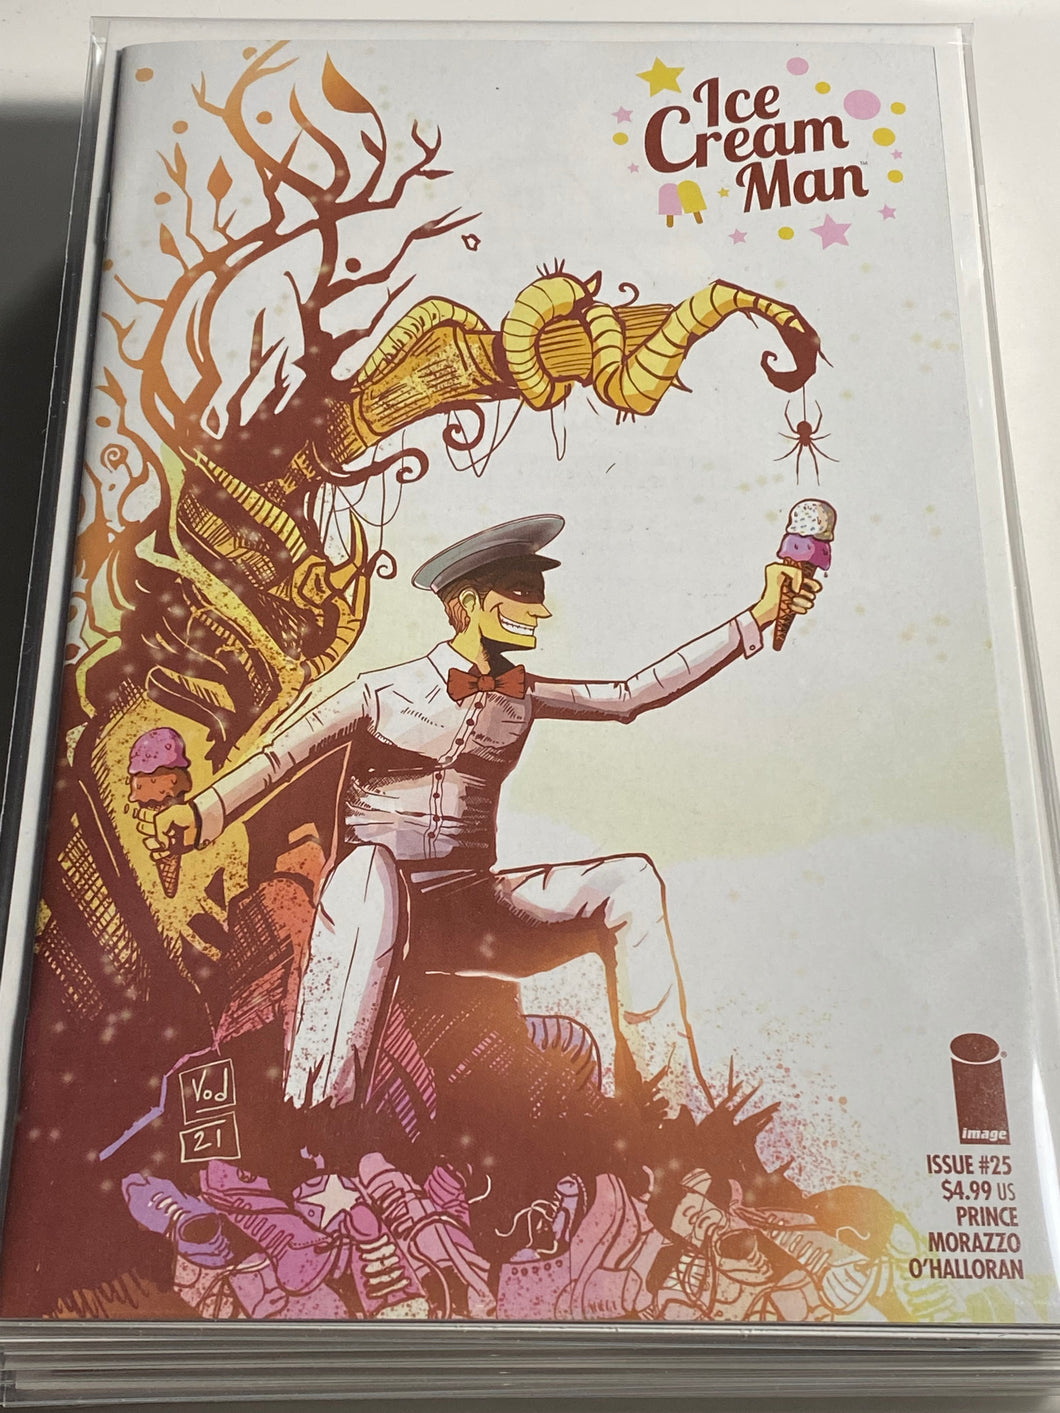 ICE CREAM MAN #25 EXCLUSIVE VARIANT LIMITED TO 450 by Victor Irizarry